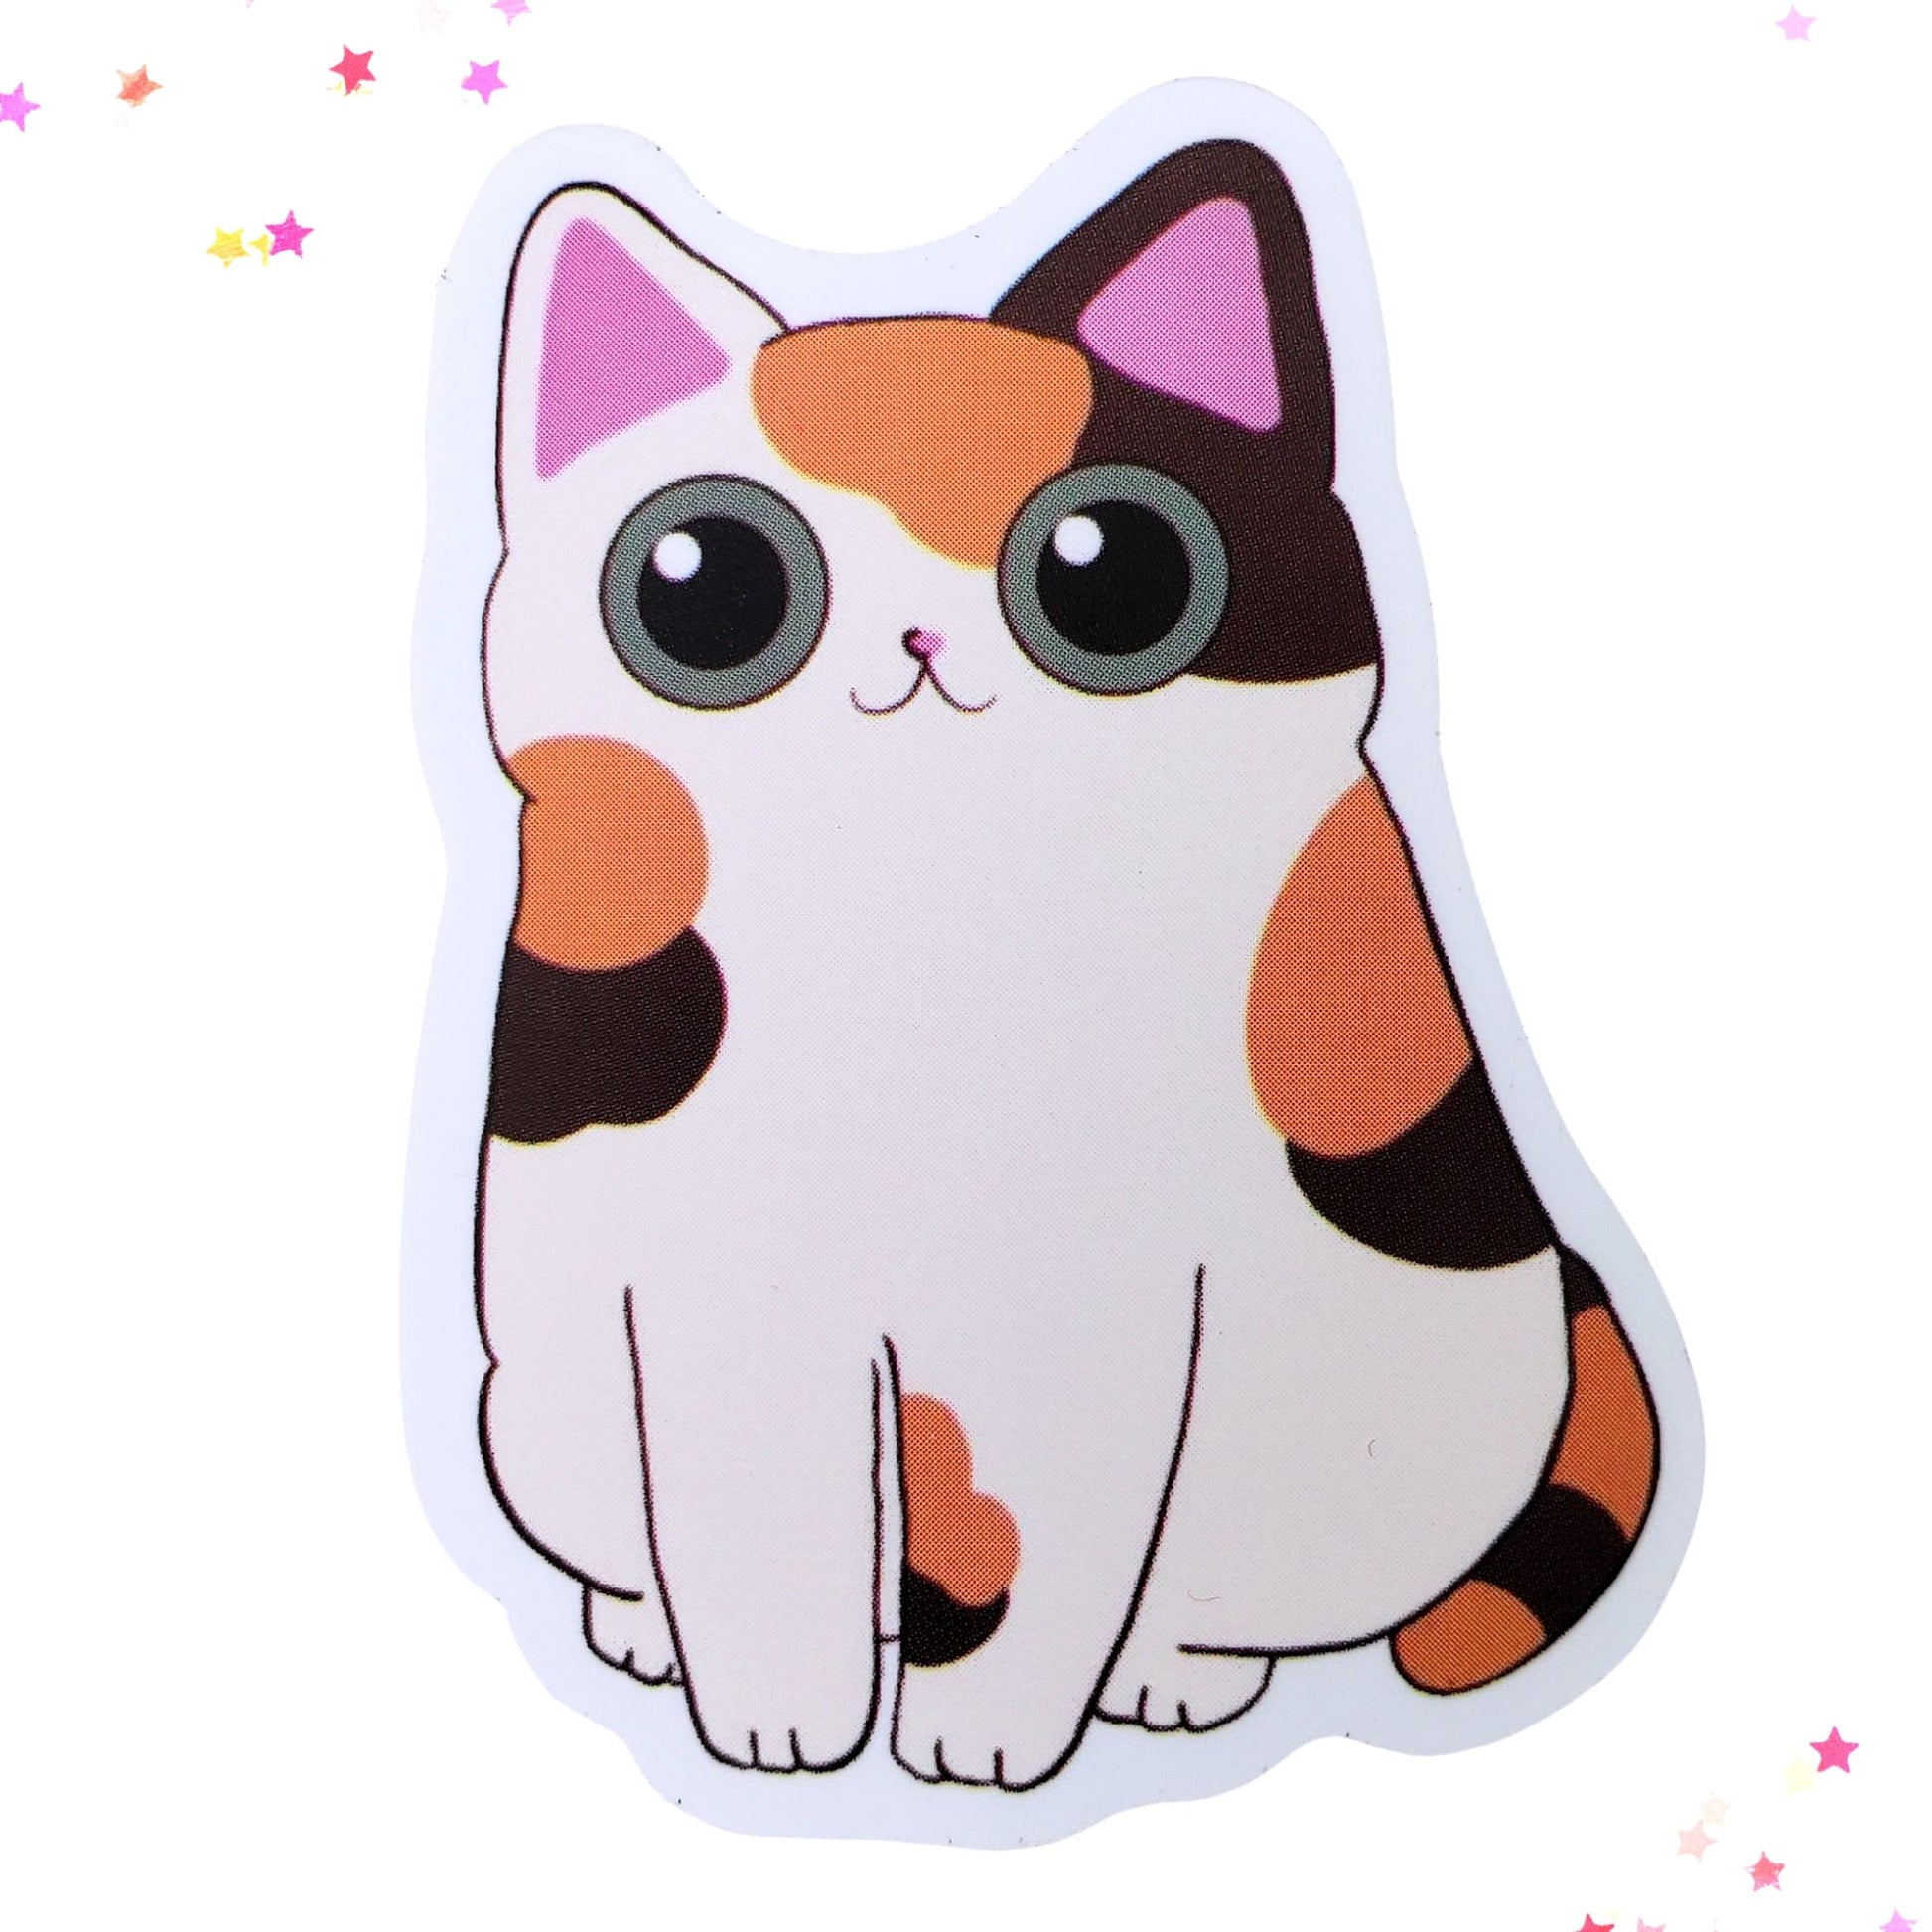 Big Eye Calico Waterproof Sticker | What Catnip from Confetti Kitty, Only 1.00